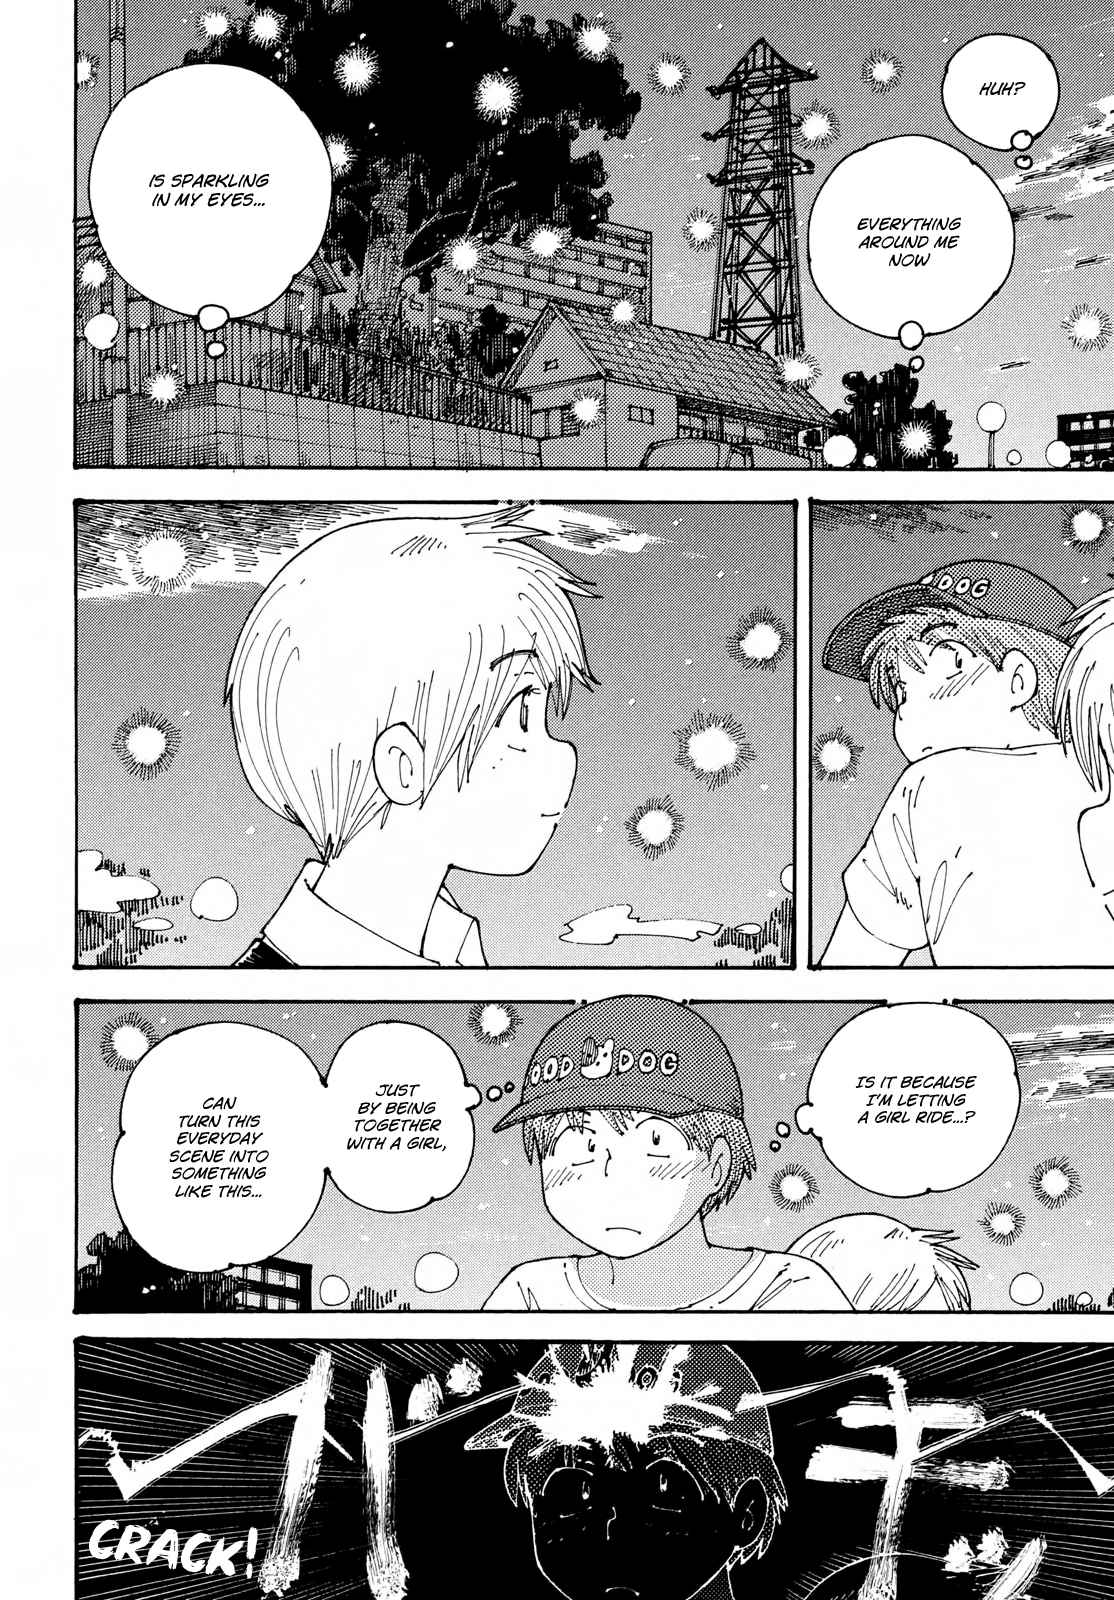 Ookumo chan Flashback Vol. 4 Ch. 18 The Same Scene as the One I'm Seeing.